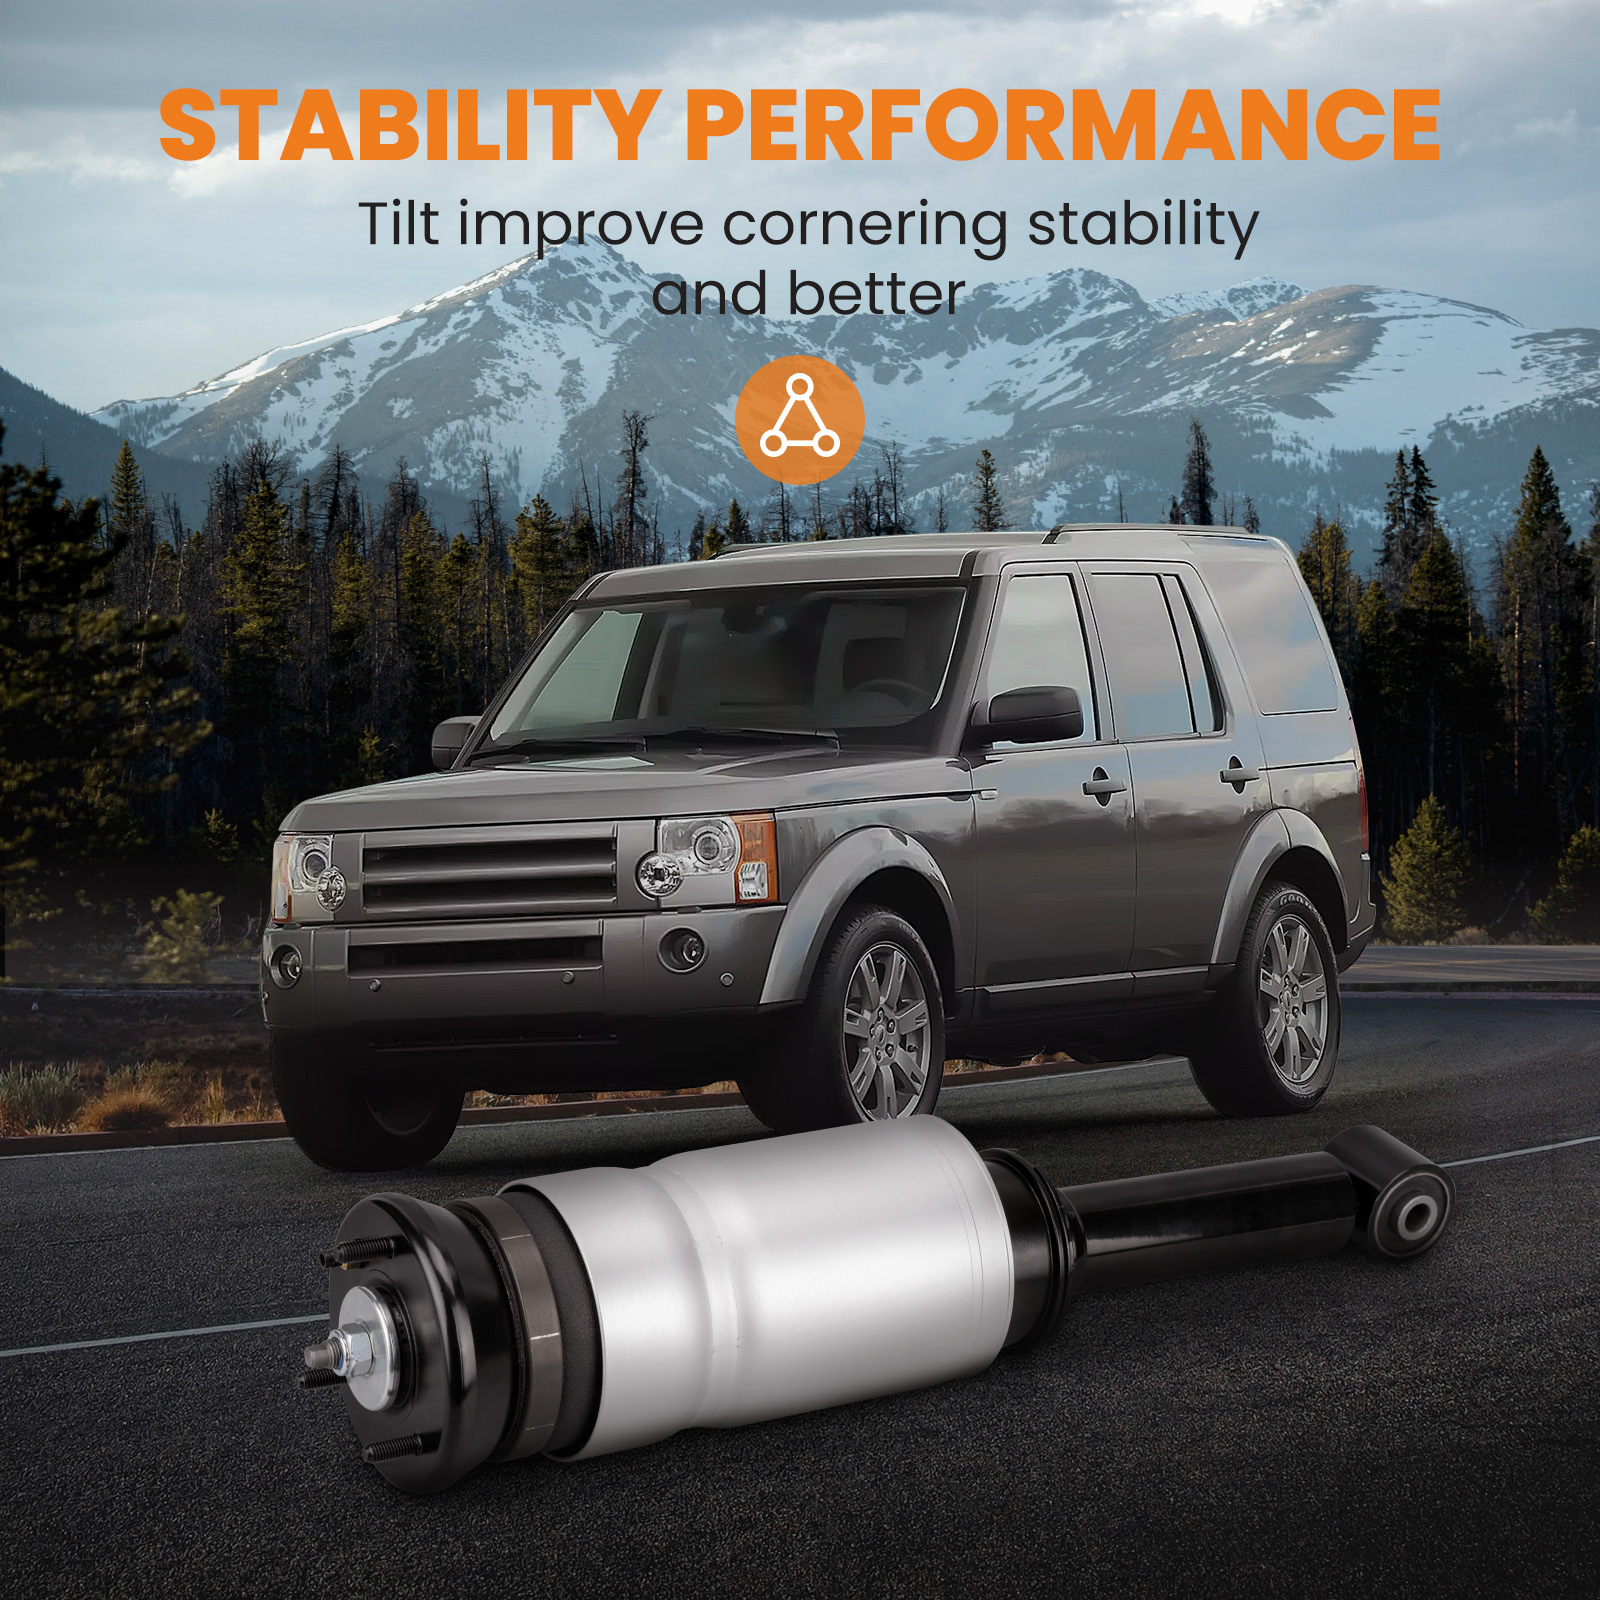 Stability Performance